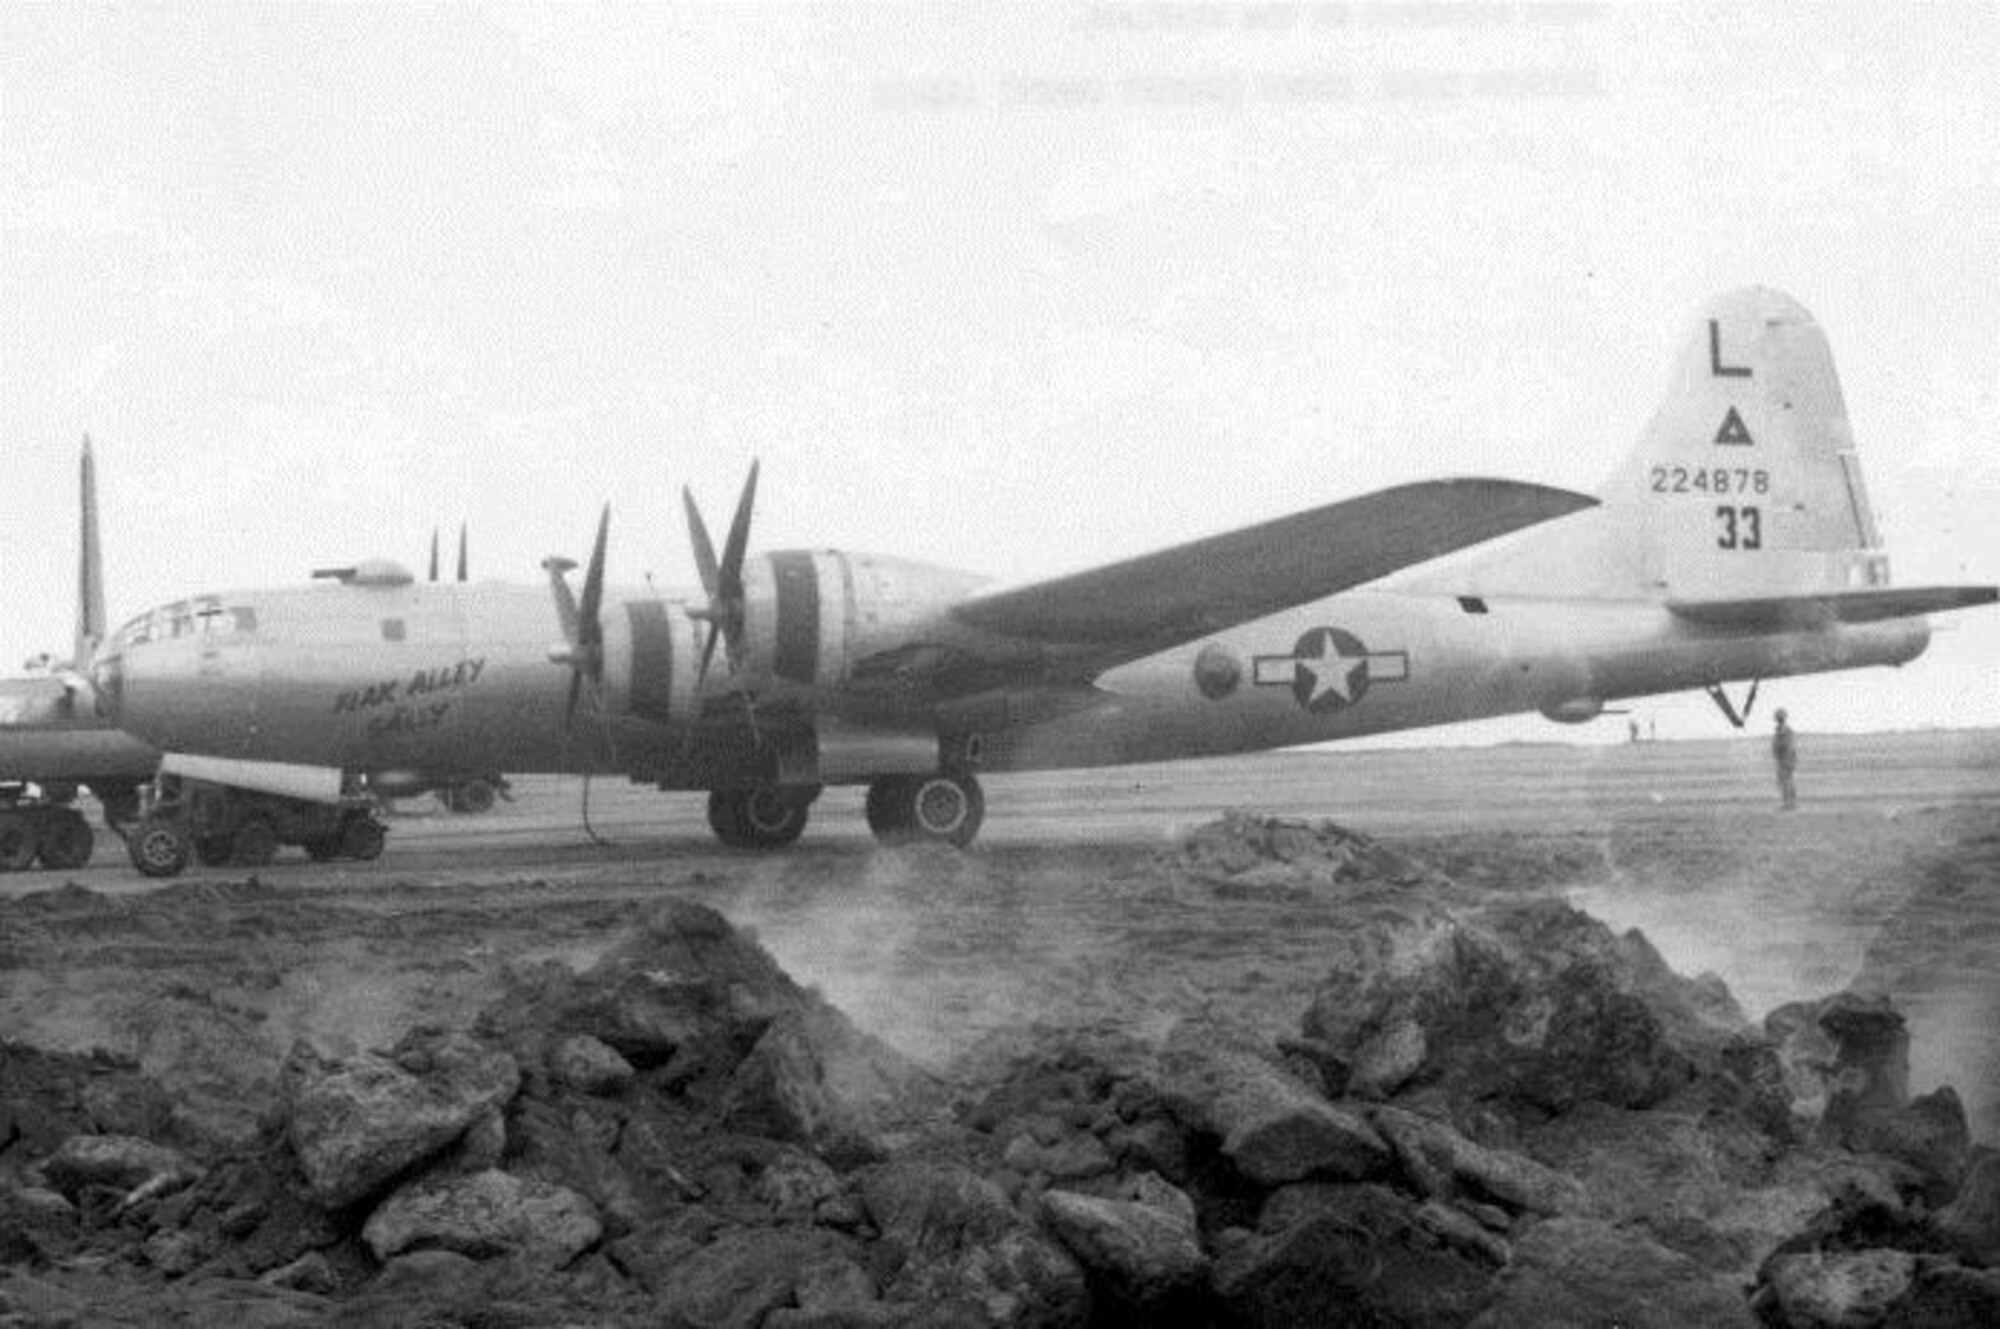 Pictured here at Iwo Jima in 1945, “Flak Alley Sally,” was a Superfortress assigned to the 40th Bomb Squadron, a B-29-55-BW, serial number 42-24878.  Seen here refueling at Iwo Jima in 1945 following a raid on the Empire, she bears the early markings of the group with the “L” (6th Bomb Group identification letter) above a triangle (313th Bomb Wing identification symbol) above the aircraft serial number.  The “33” is an early Victor number (group/squadron aircraft identification number also used as a radio call sign number), which was later moved to the rear fuselage and changed to “53.” (Courtesy 6th Bomb Group Association)